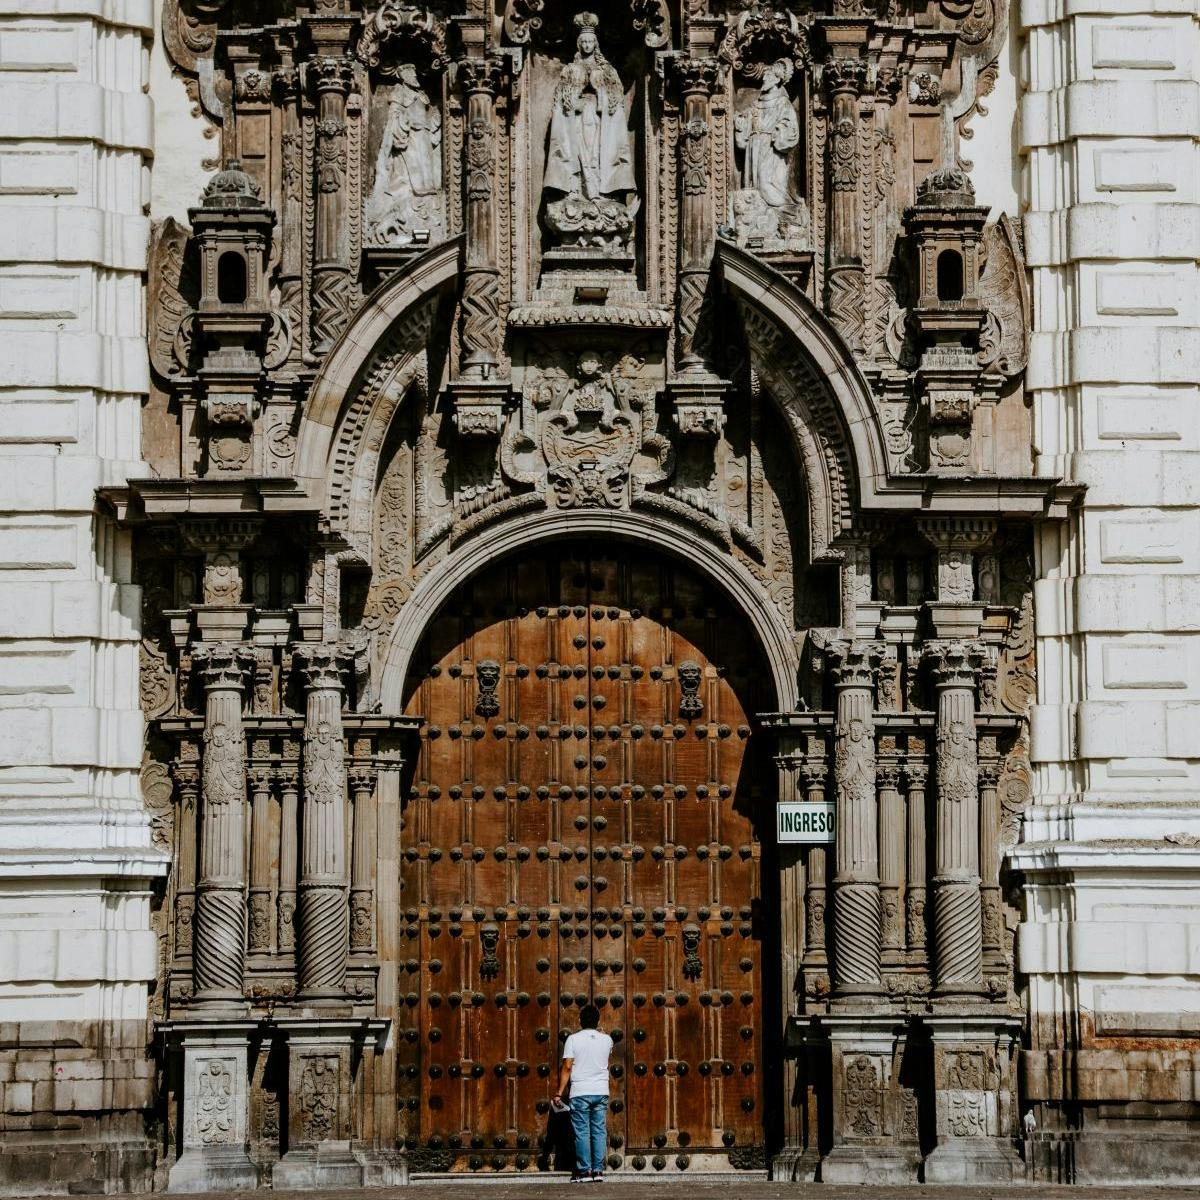 man standing near an arched wooden doorway of a regal cathedral